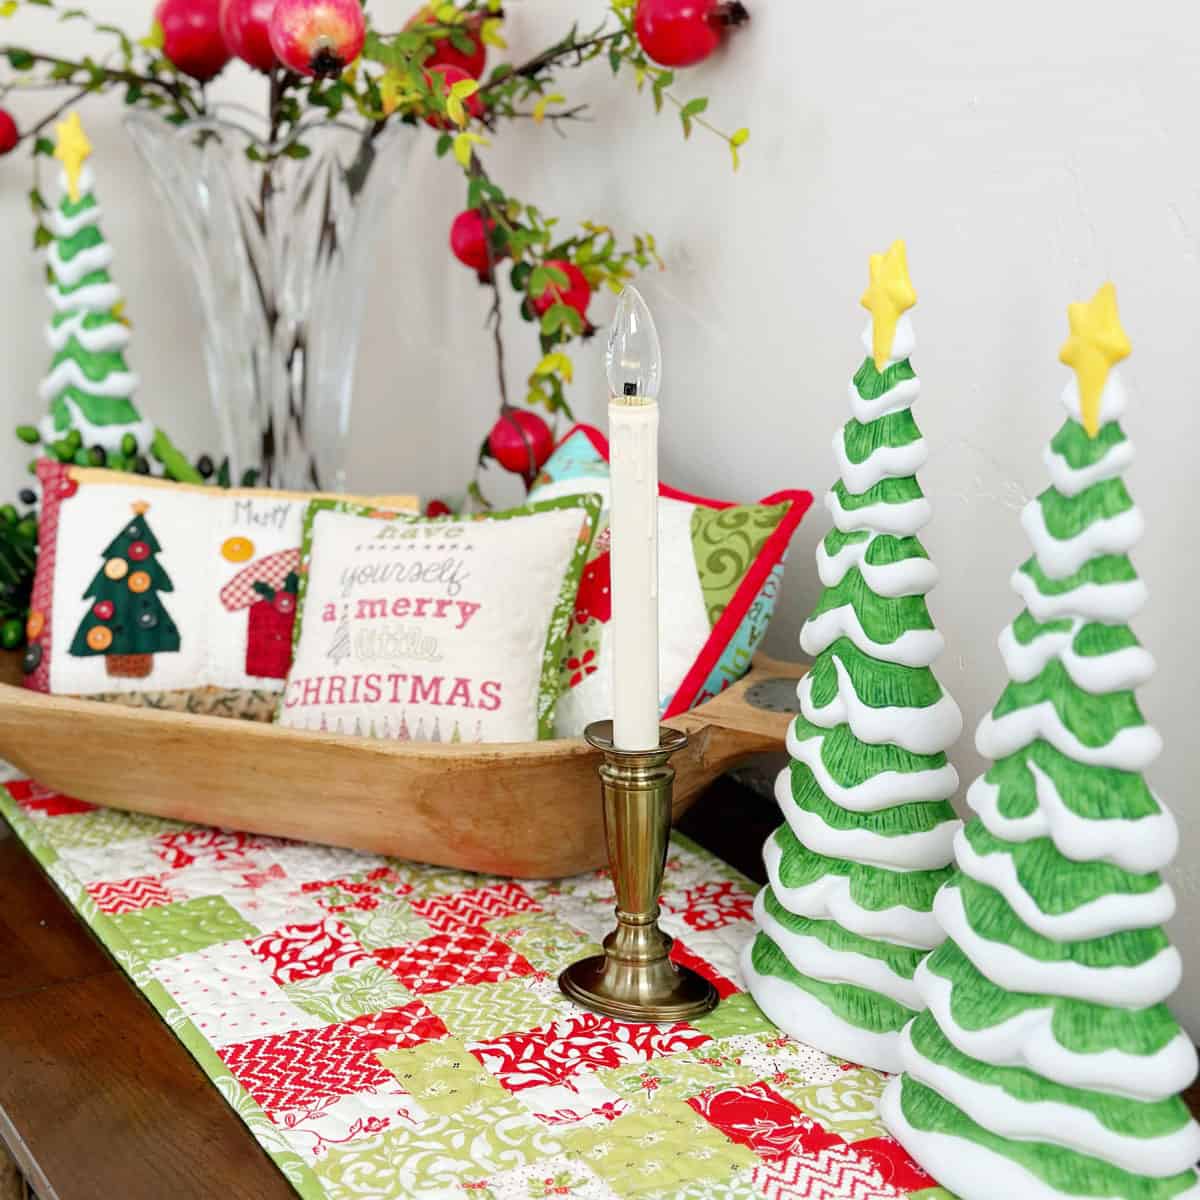 Christmas pillows in bowl with ceramic Christmas trees and candle